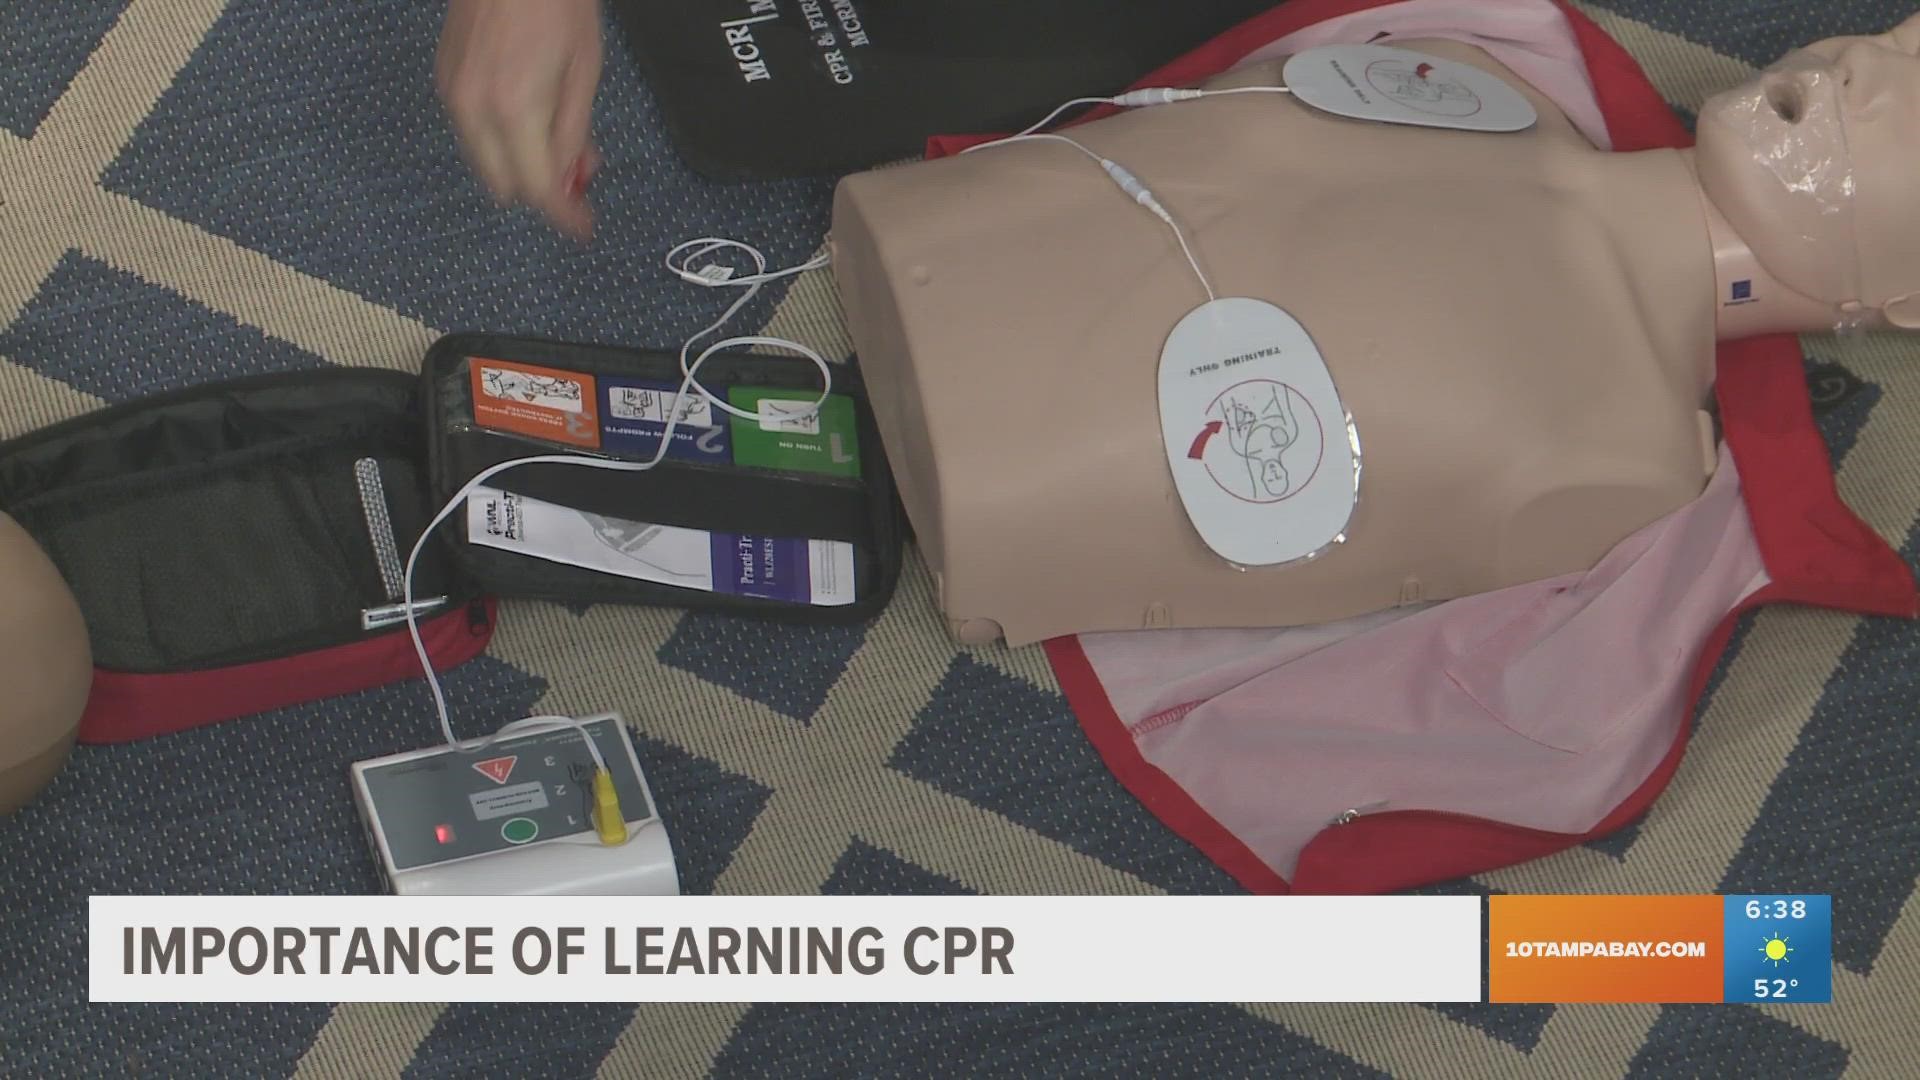 Local business owner Tamisha Derks talks us through how to safely and properly use an Automated External Defibrillator (AED).